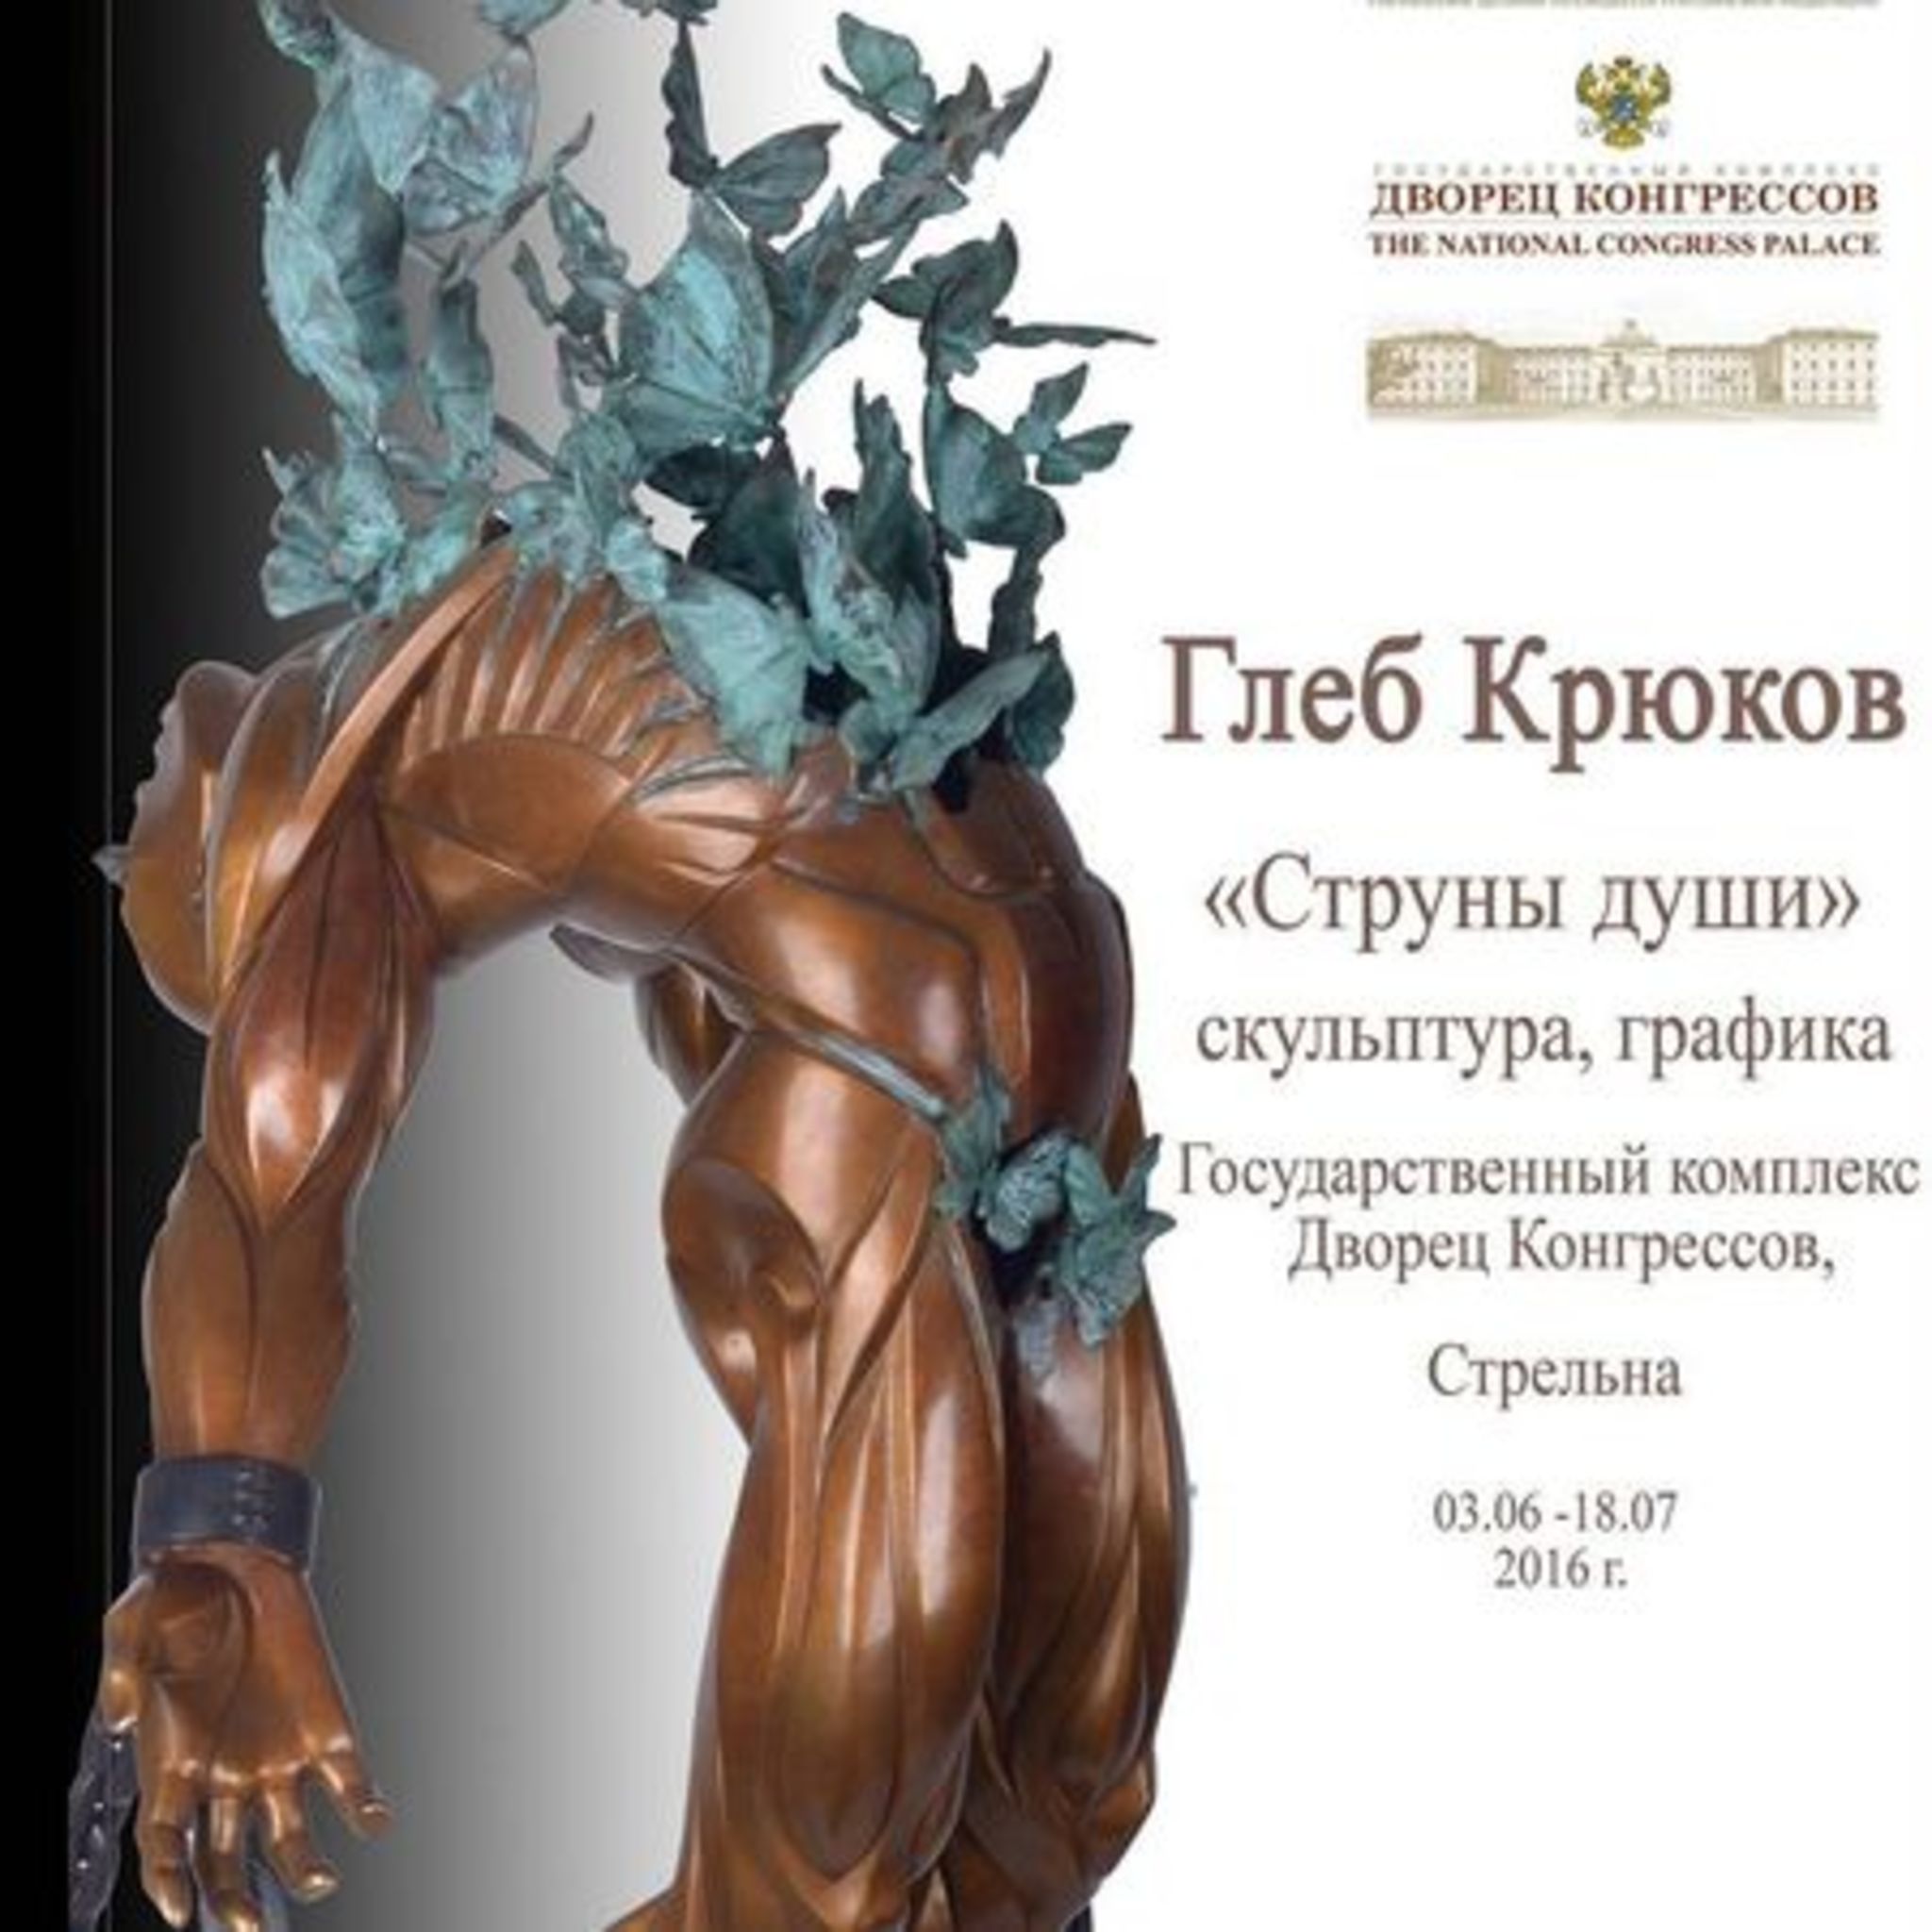 Exhibition of sculptures and drawings by Gleb Kryukov Strings of Soul